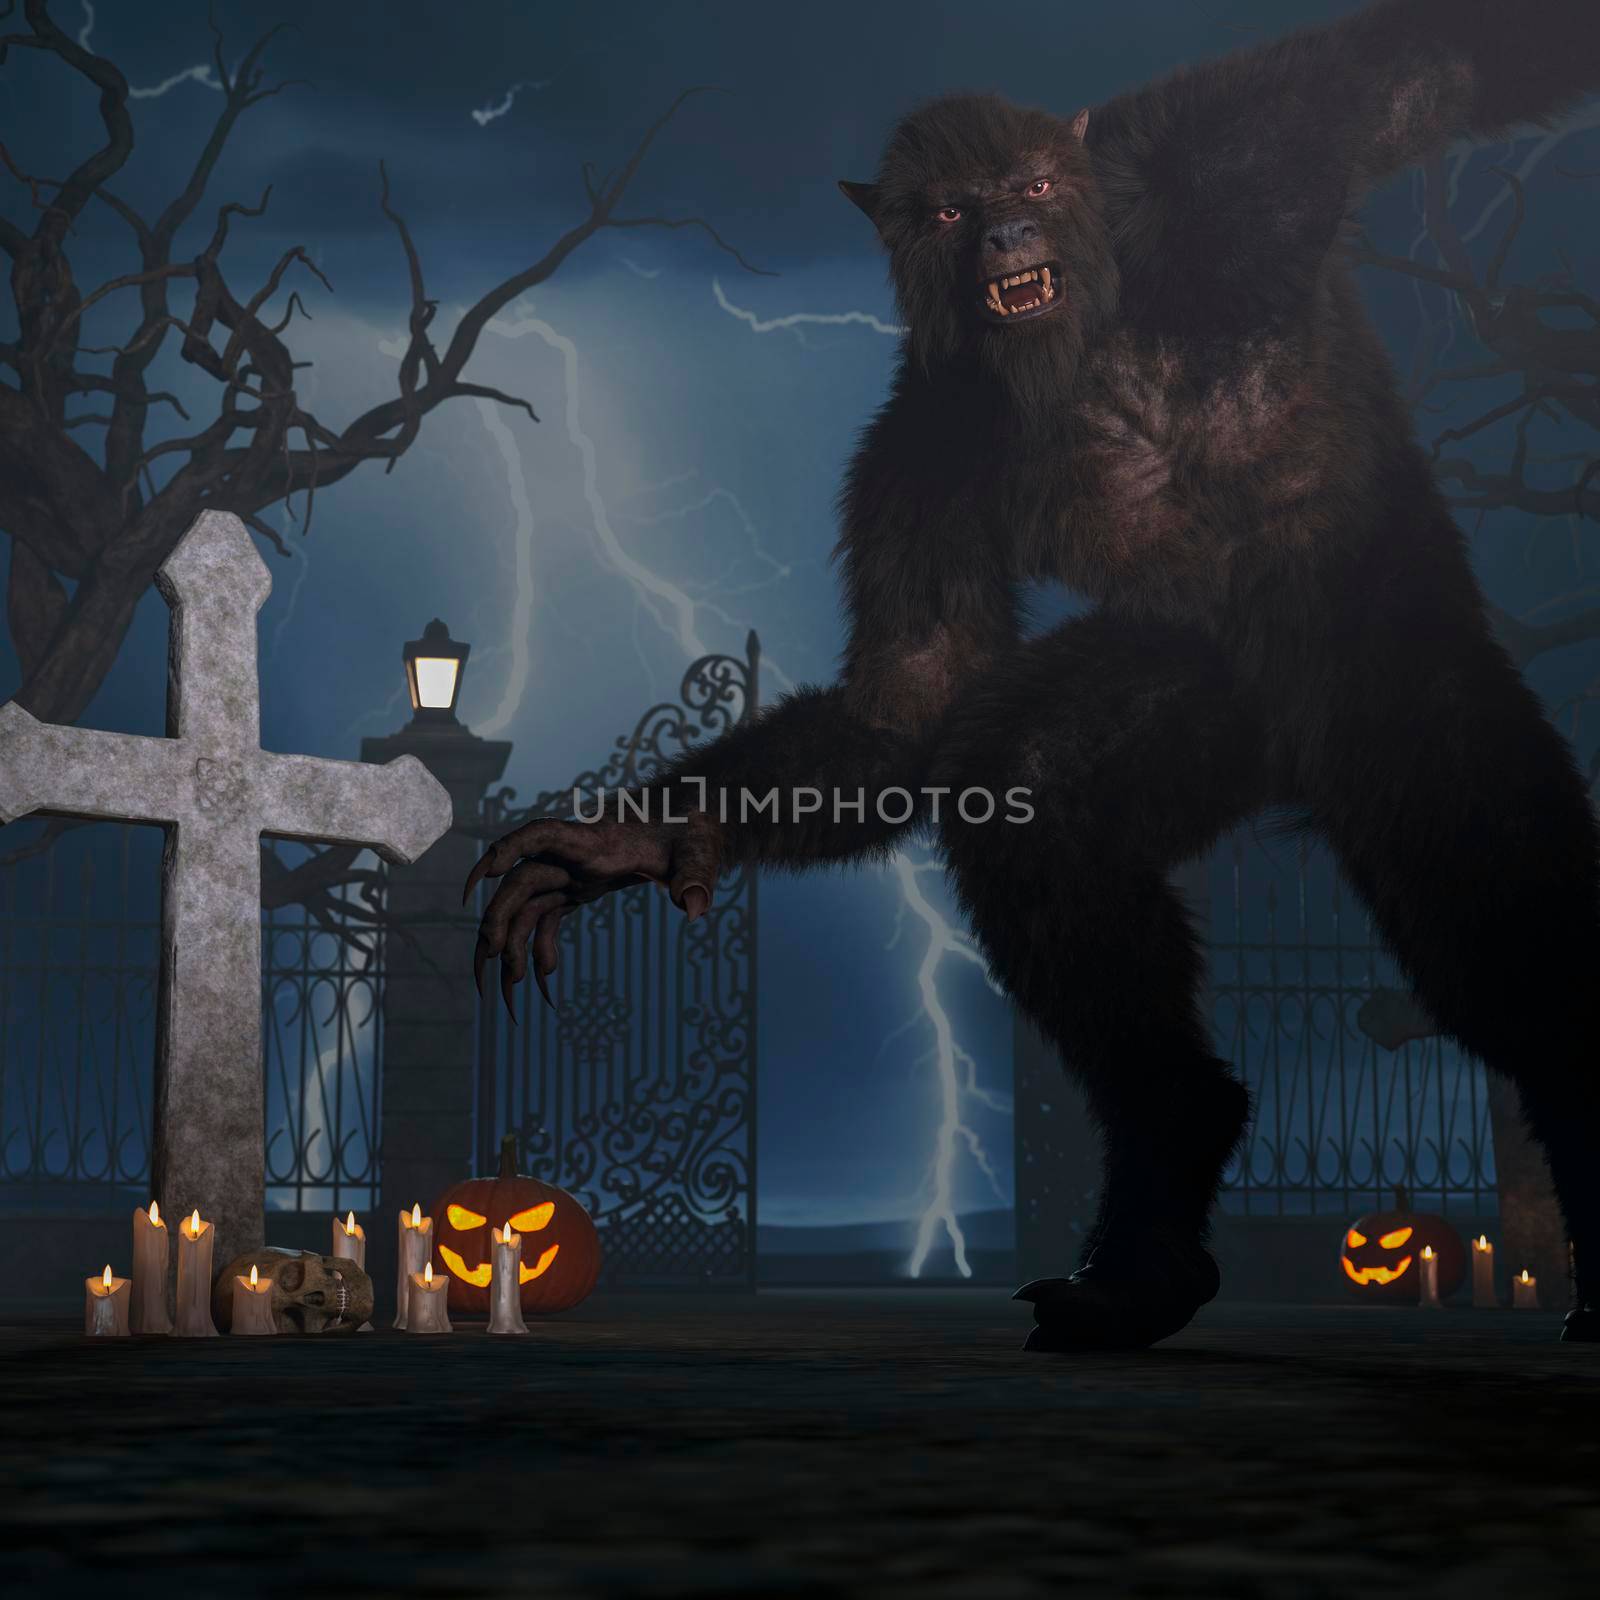 Illustration of a werewolf during the night in the creepy cemetery by ankarb